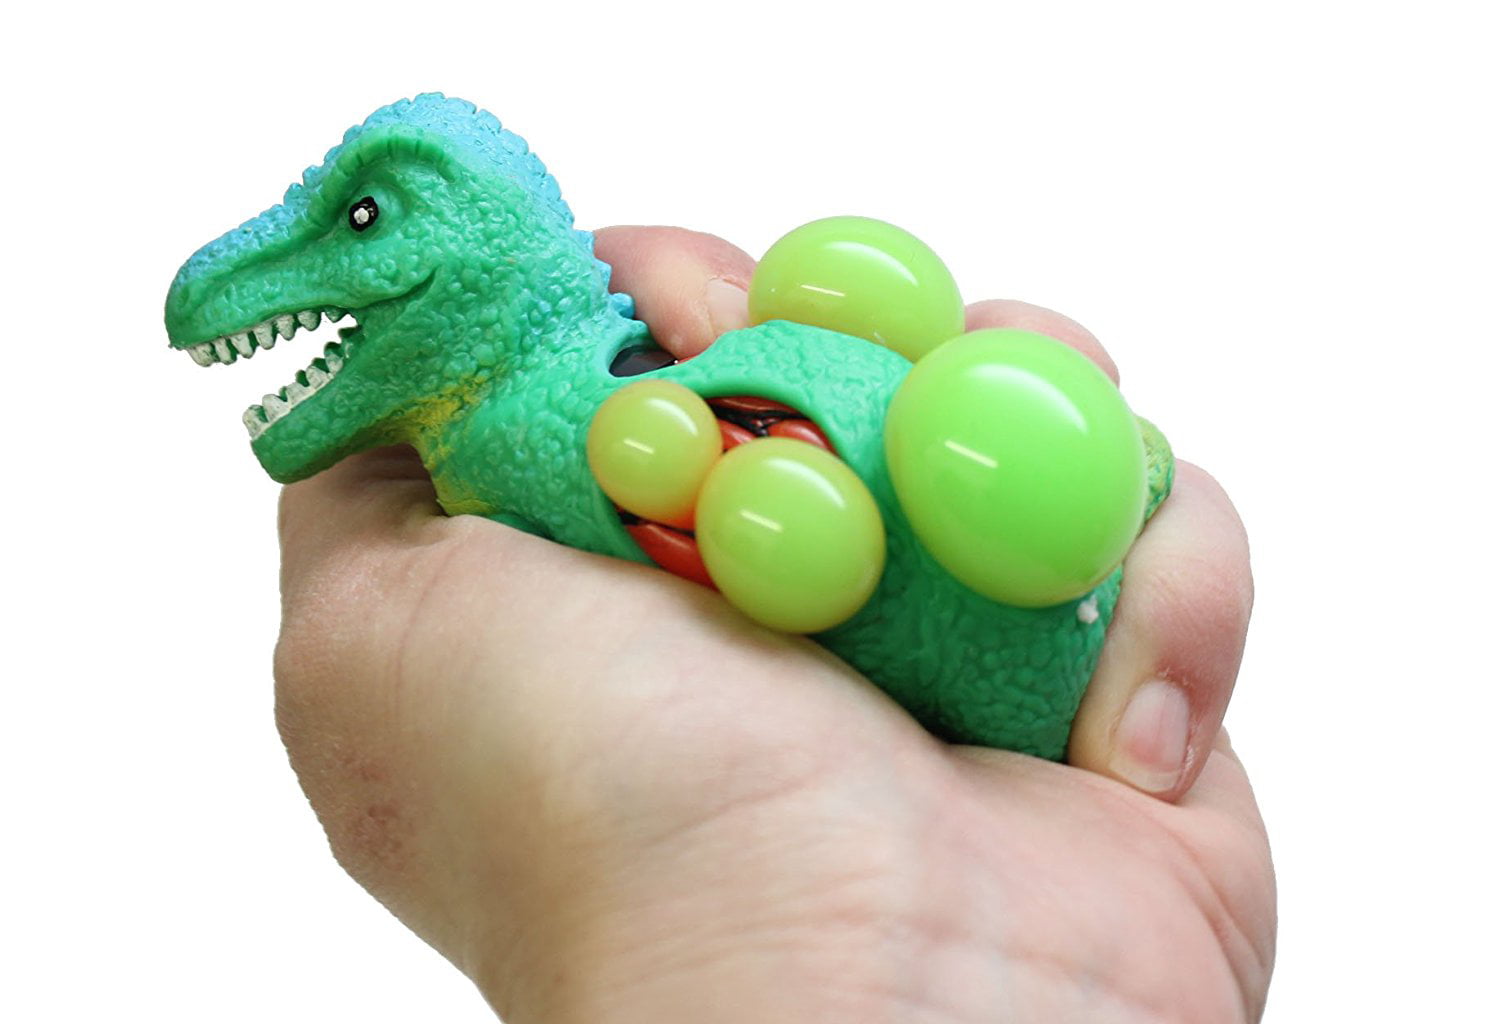 Teydhao Creative Dinosaur Ball Squeeze Simulation Model Stress Relief Adult Toy Kawaii Mini Soft Squeeze Toy Fidget Hand Toy for Kids Girls Boys Toddlers Gift Stress Relief Decoration Random Style 